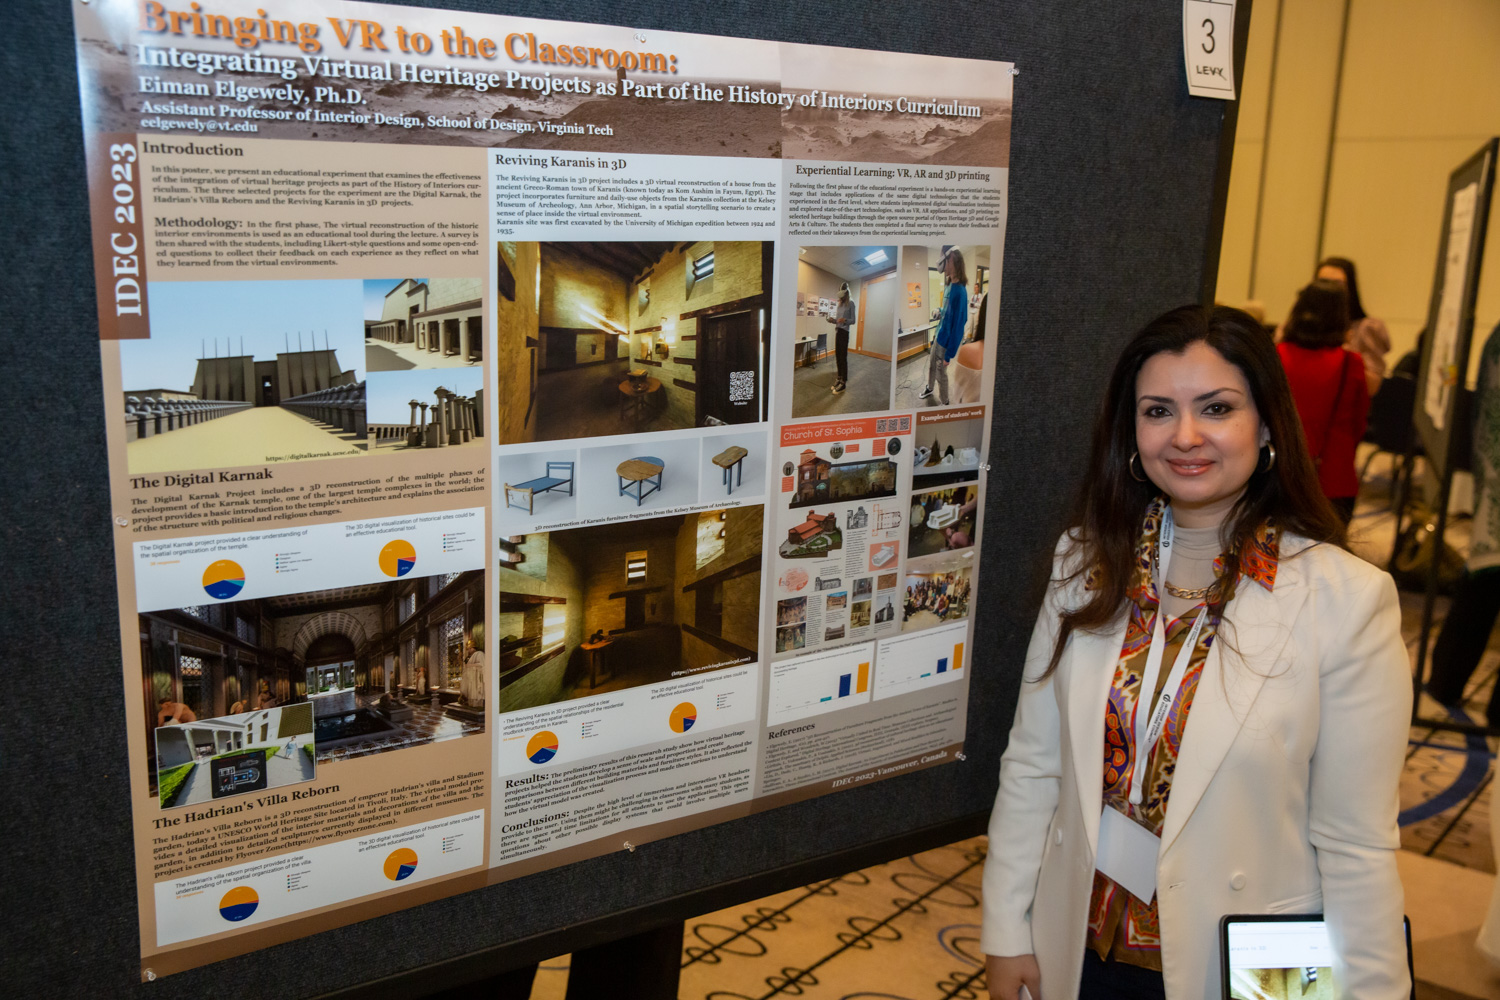 Eiman Mohamed Elgewely standing next to poster titled "Bringing VR to the Classroom"